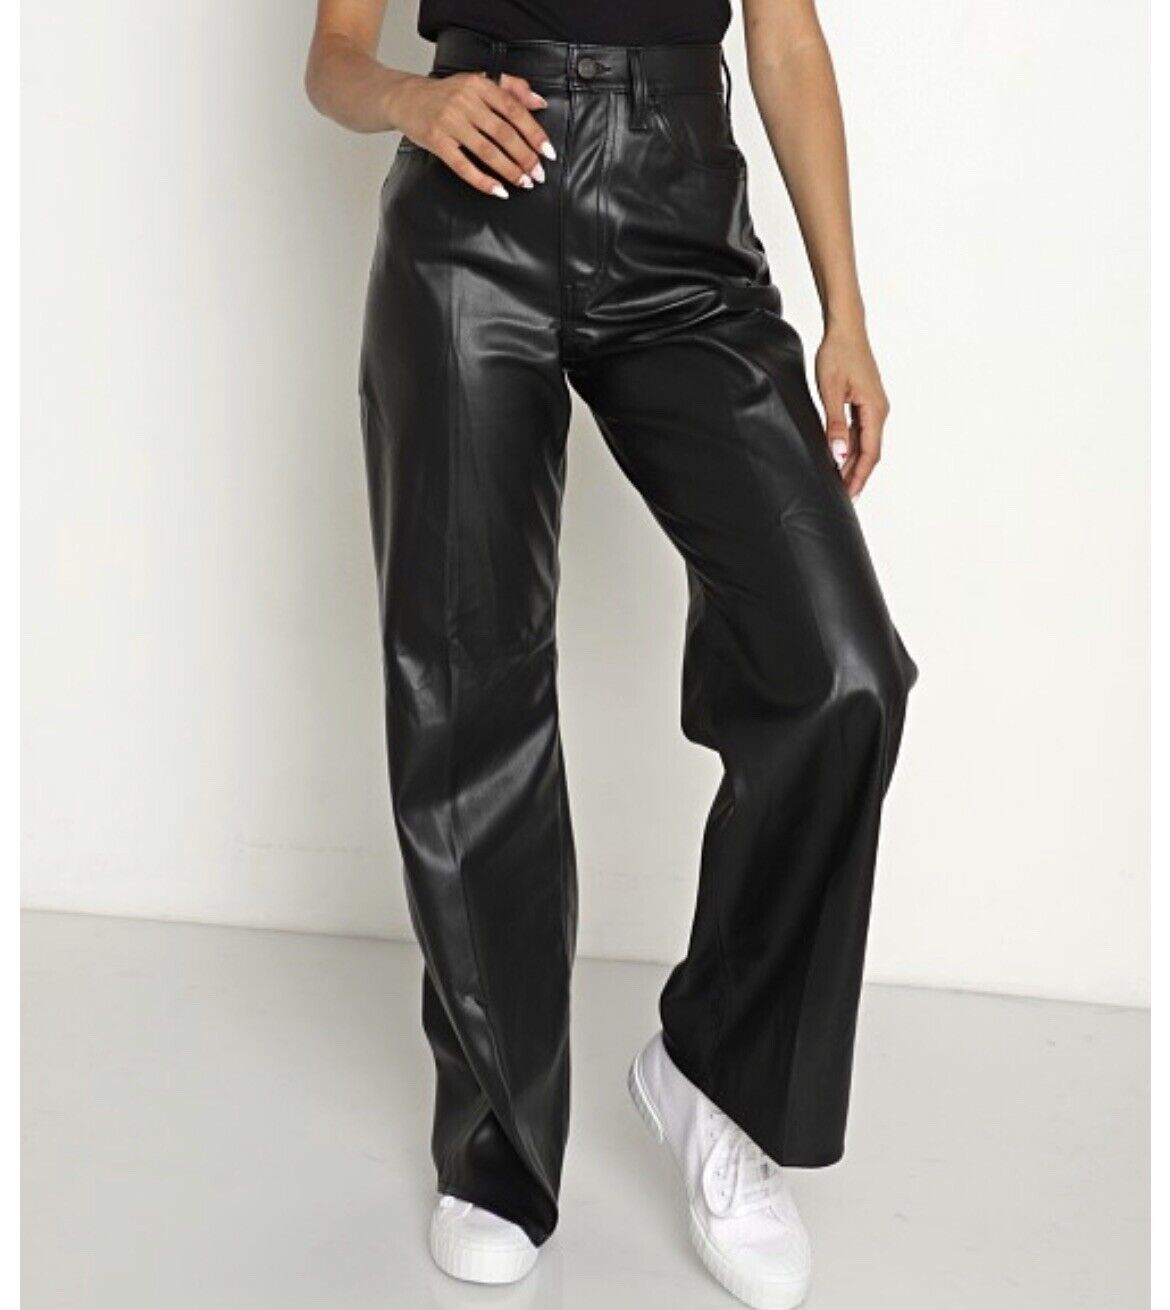 Levi's Women's 70s Flare Faux Leather Pant in Leather Night Size 29X32 NWT  $108 | eBay